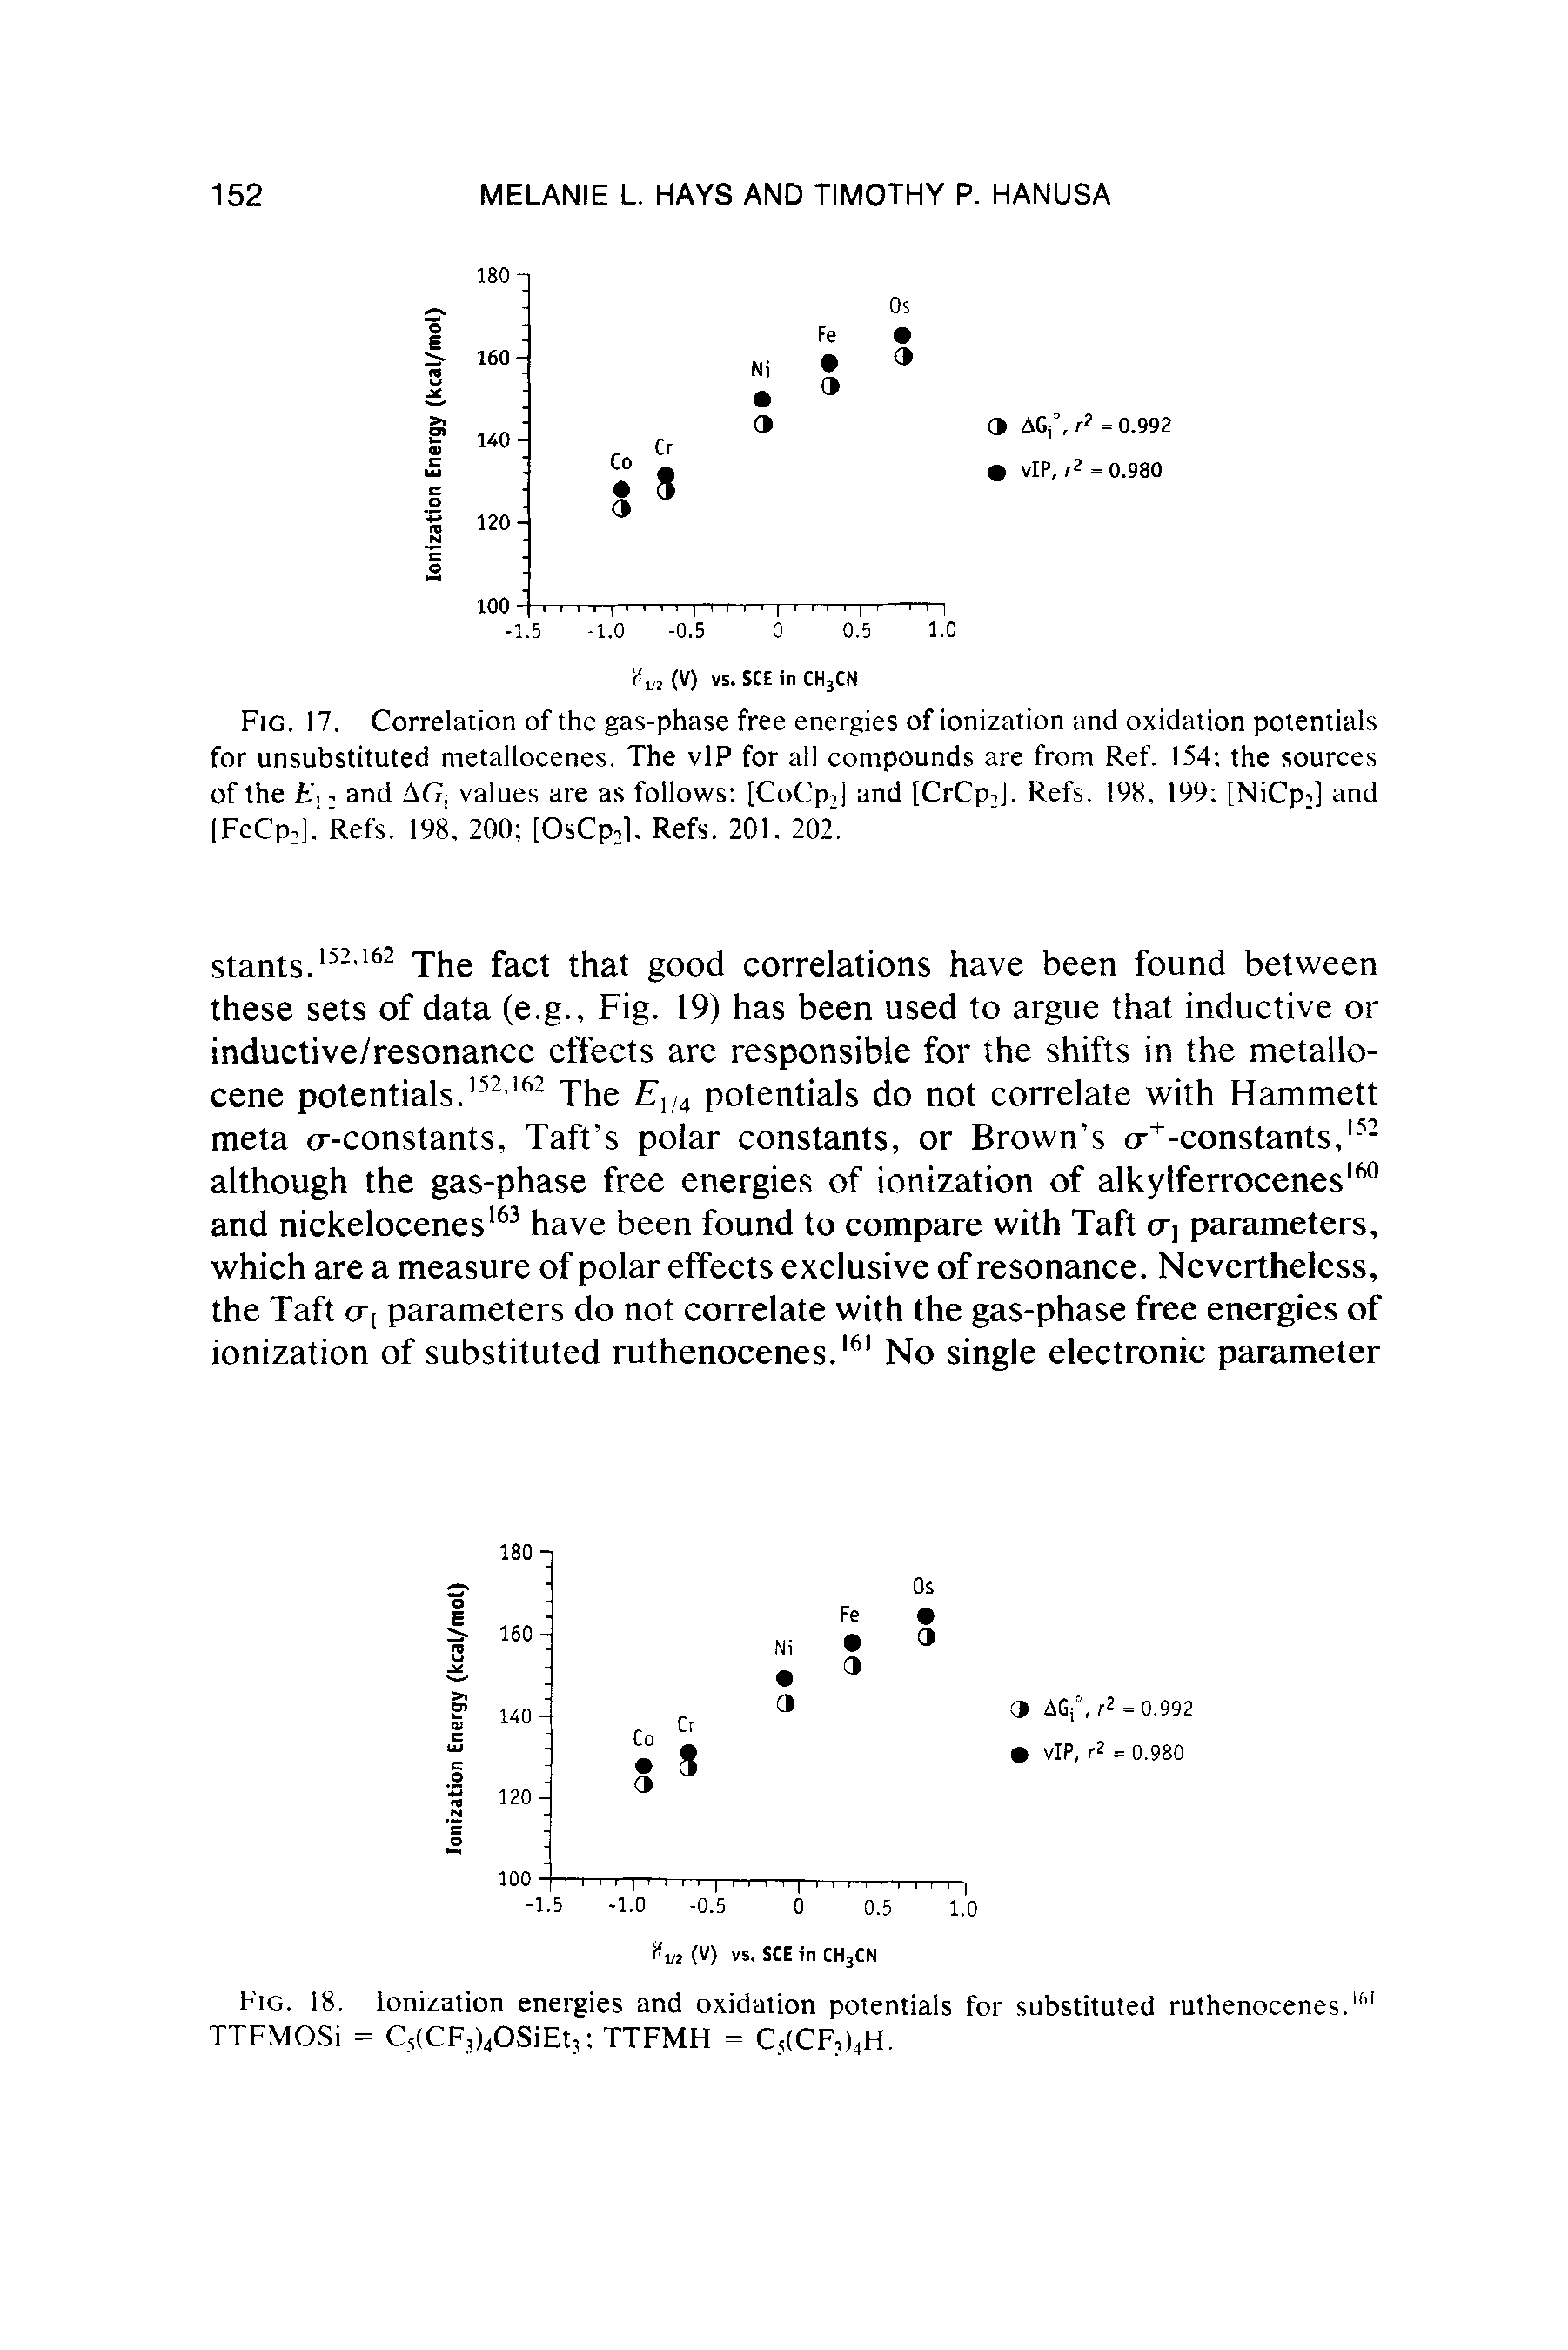 Fig. 17. Correlation of the gas-phase free energies of ionization and oxidation potentials for unsubstituted metallocenes. The vlP for all compounds are from Ref. 154 the sources of the Ex and values are as follows [CoCp2] and [CrCp J. Refs. 198. 199 [NiCps] and [FeCpi]. Refs. 198. 200 [OsCp2l. Refs. 201. 202.